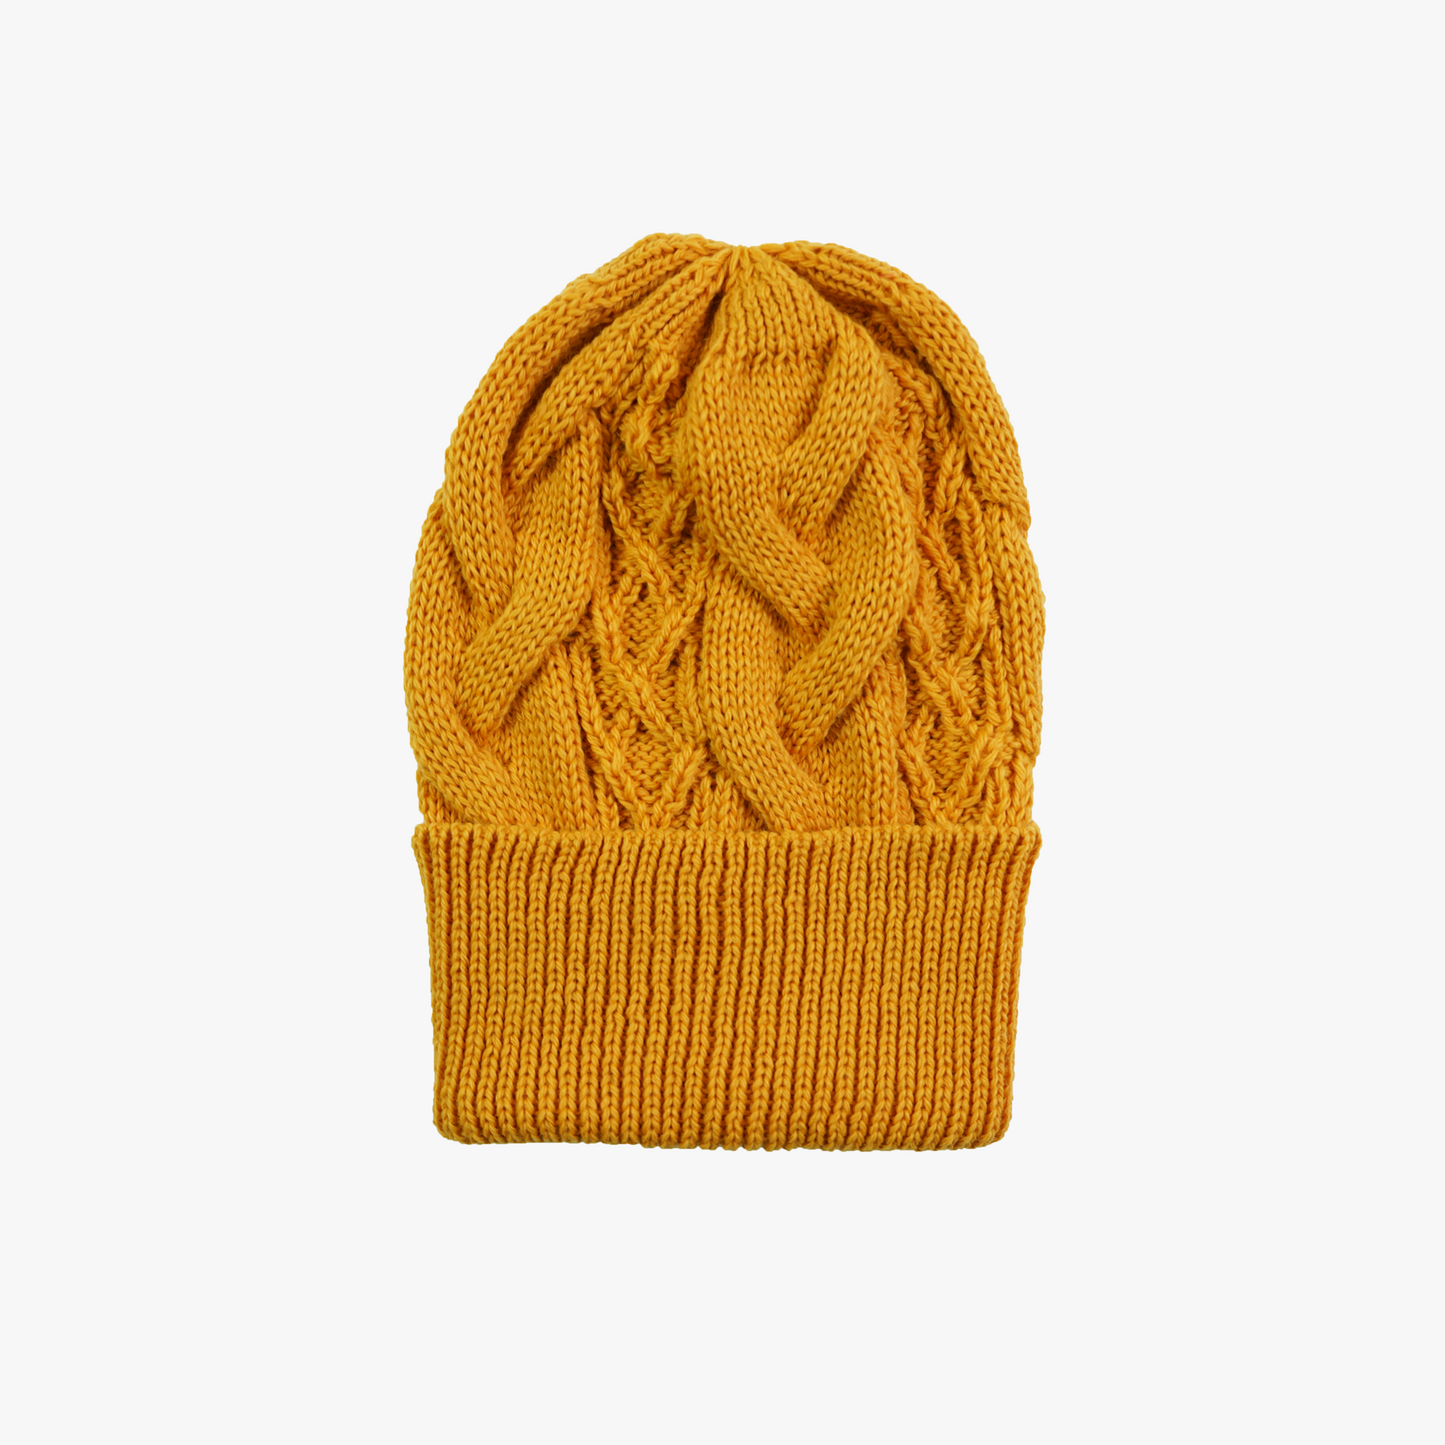 Cable Hat in Marigold